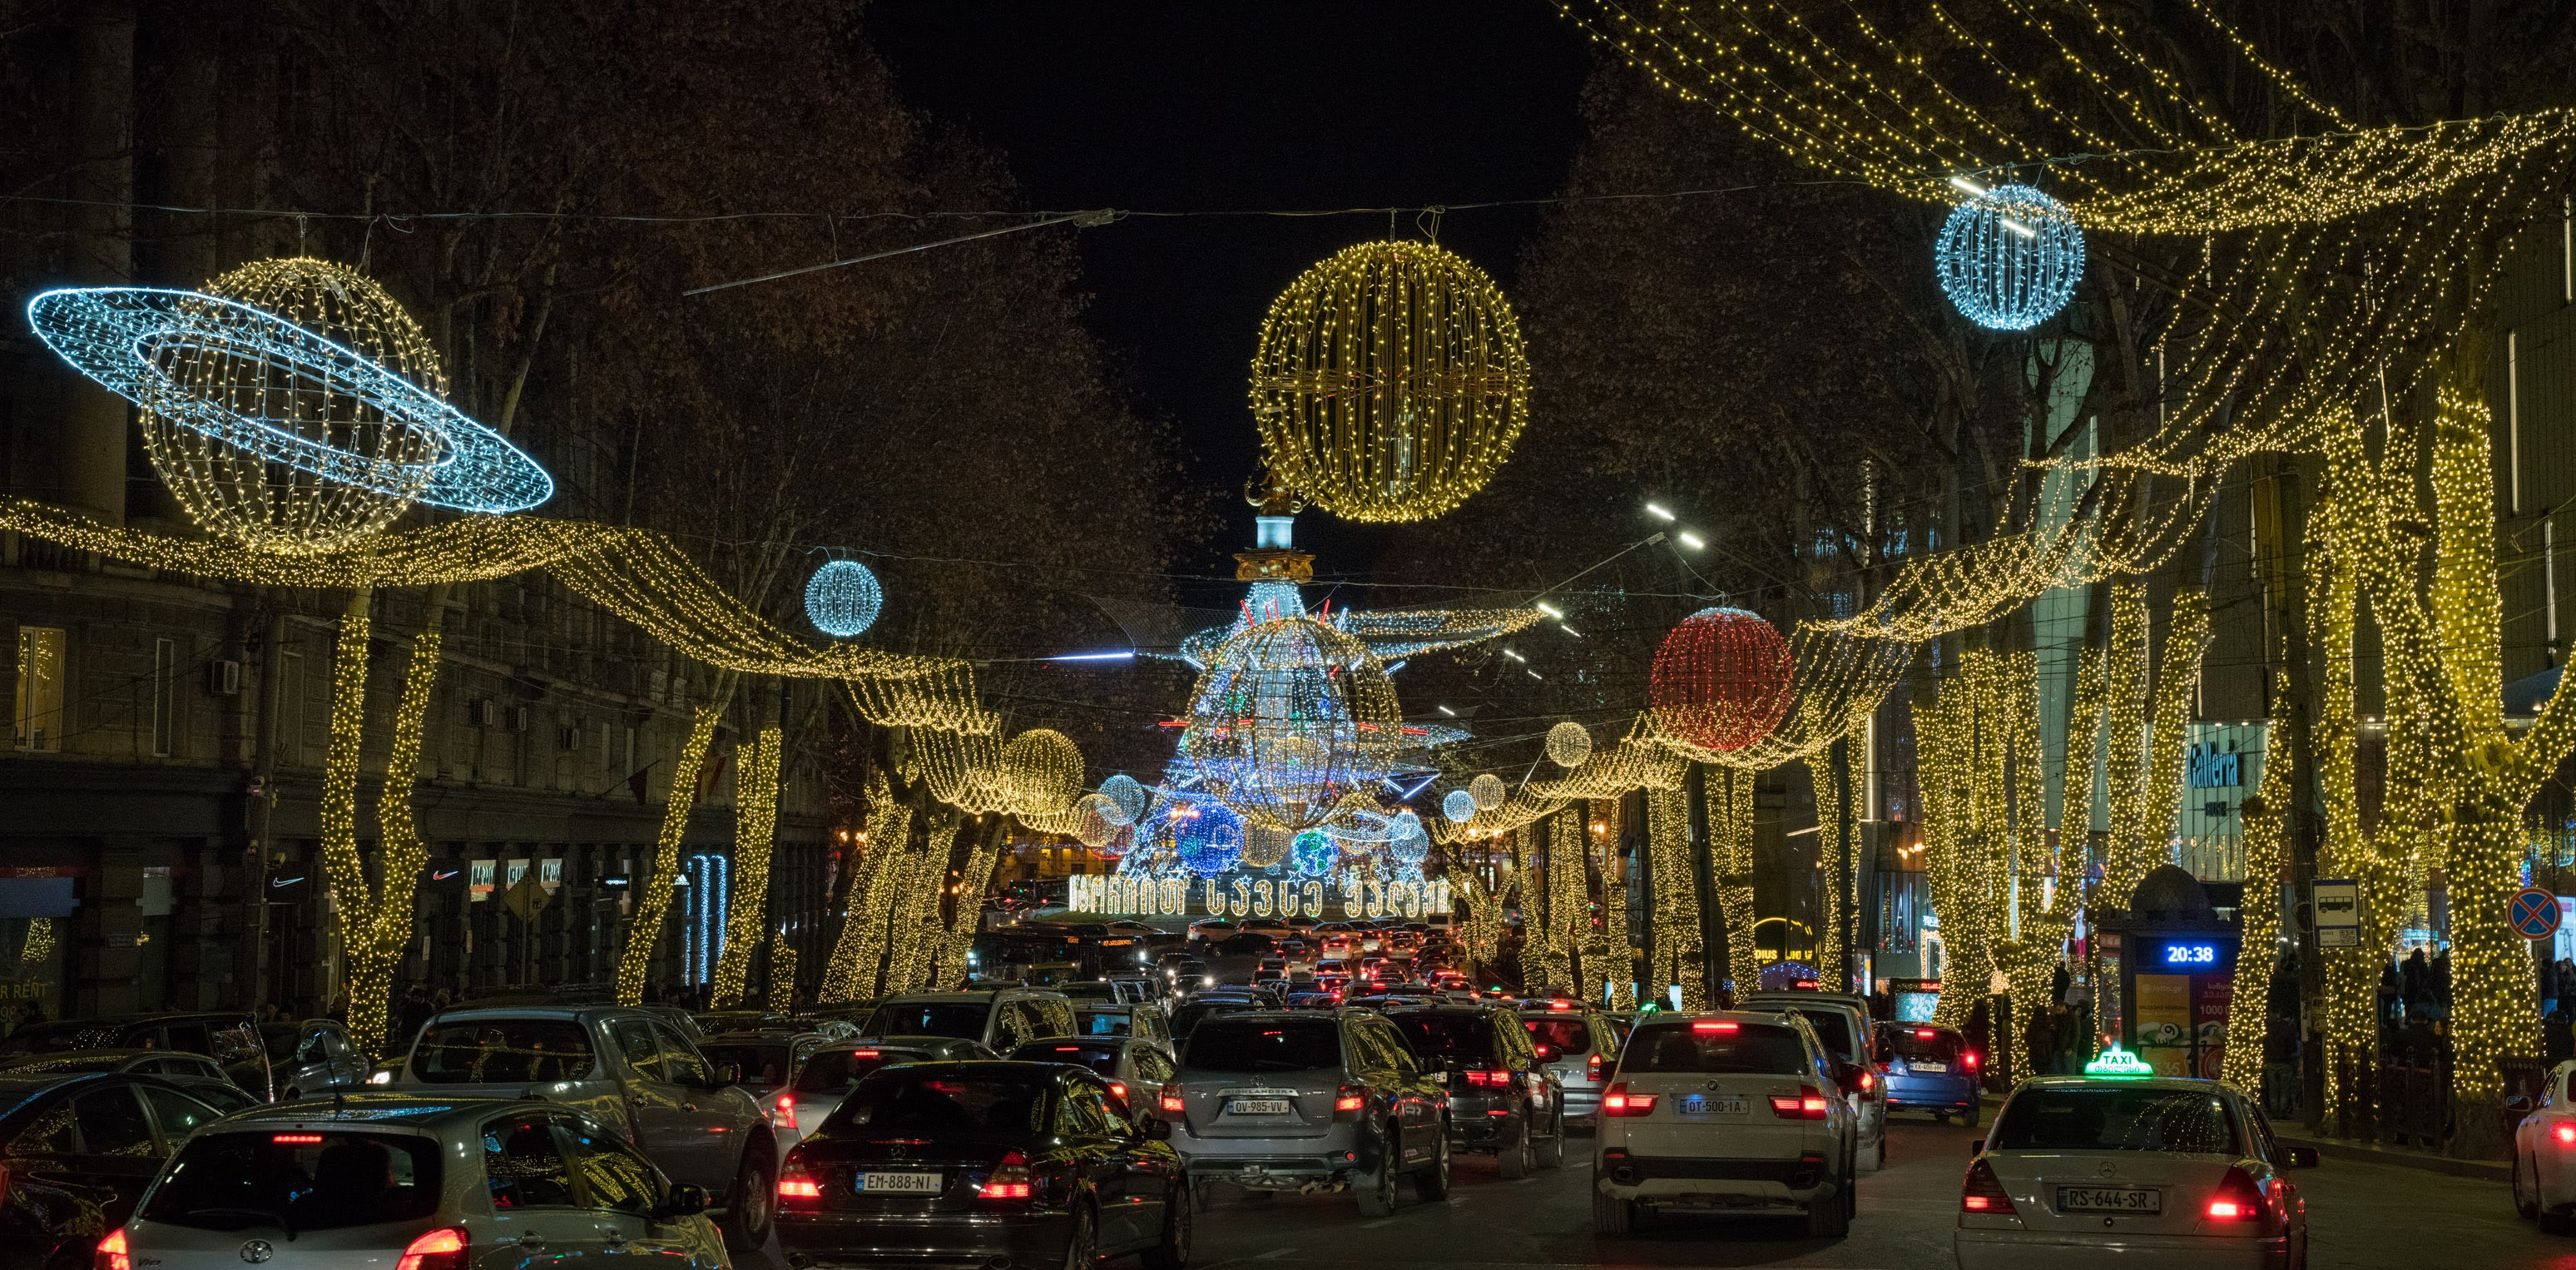 December is the most festive time to visit Tbilisi